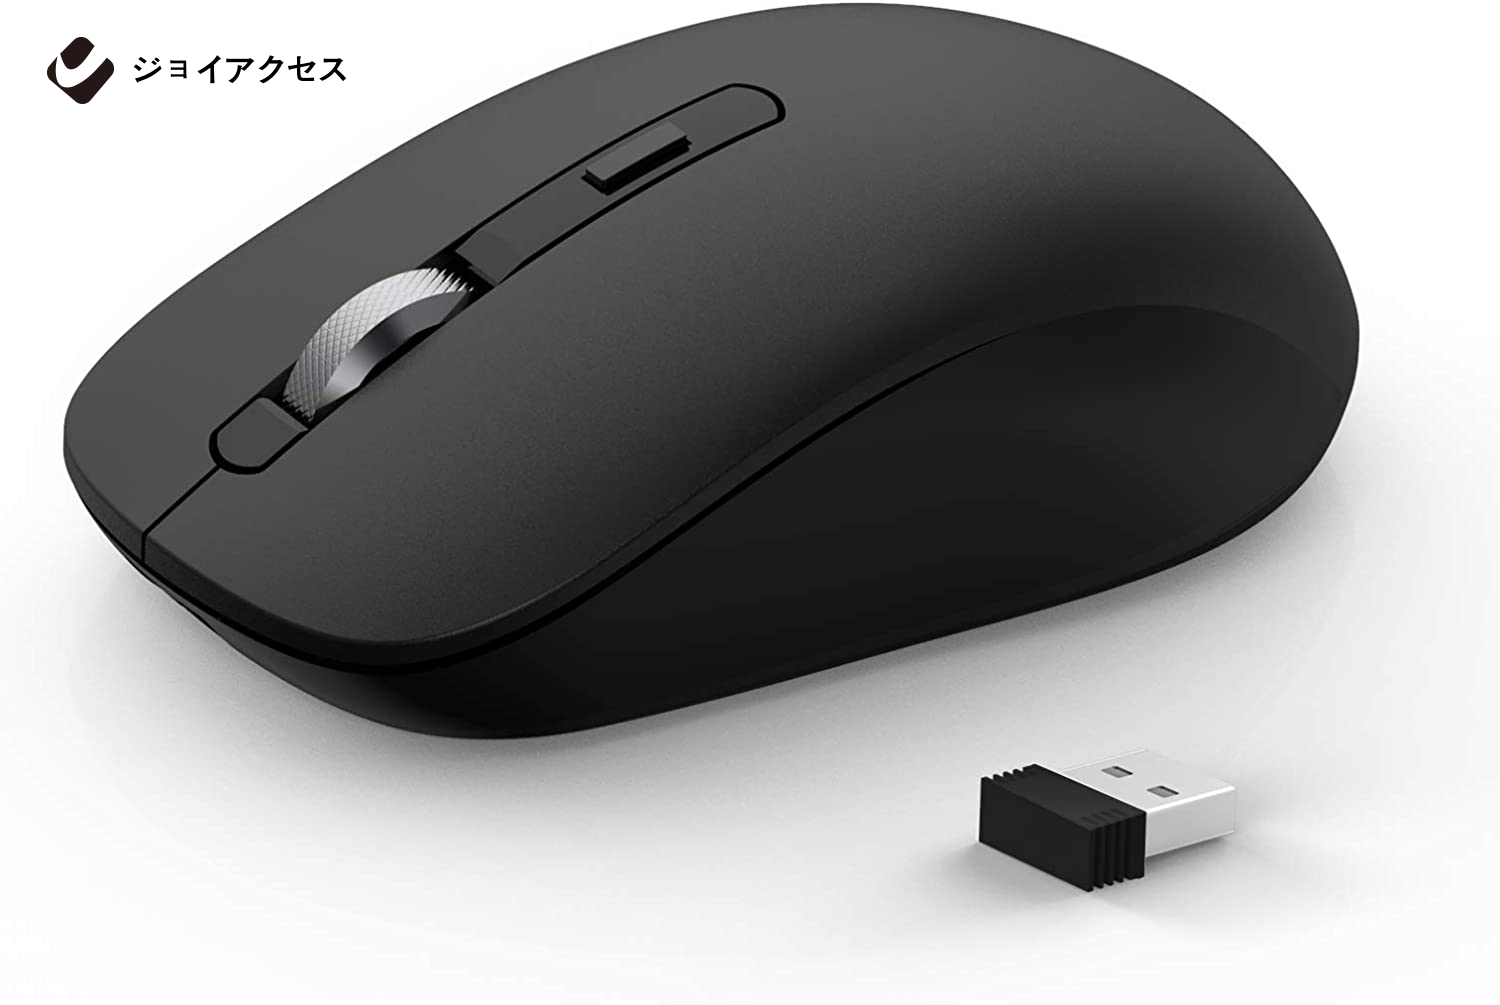 Bluetooth Mouse, JOYACCESS 2.4G Wireless Bluetooth Mouse Dual Mode(Bluetooth 5.0/3.0+USB), Computer Mice for Laptop/ Computer MacBook/ Windows/ MacOS/ Android - Black
